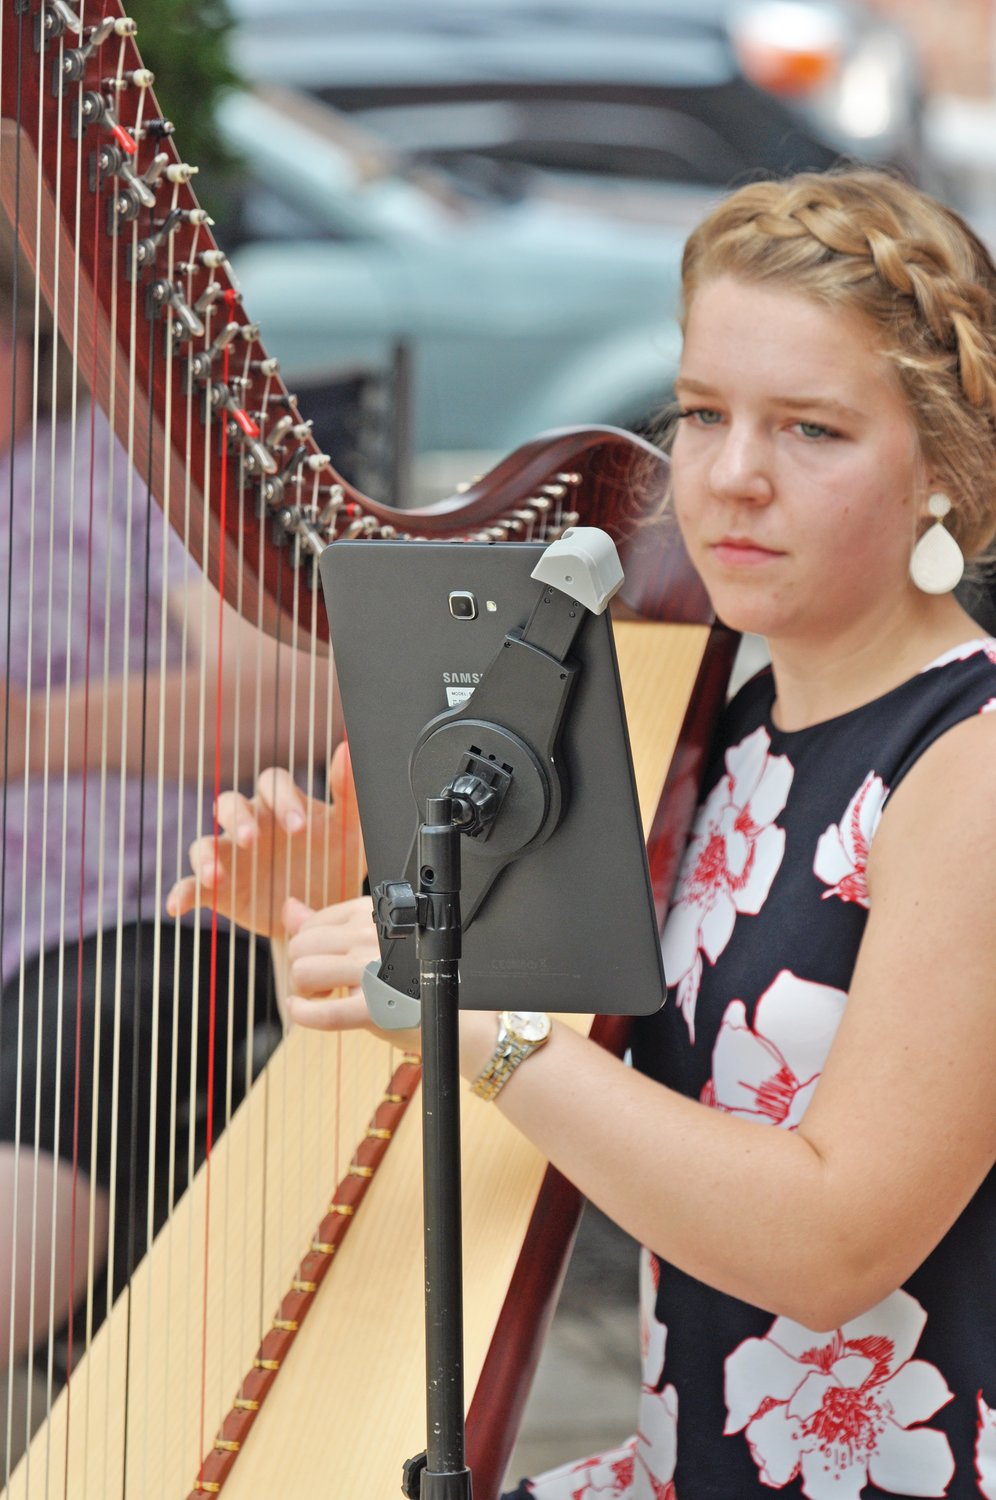 Olivia Overpeck performs during Crawfordsville Main Street